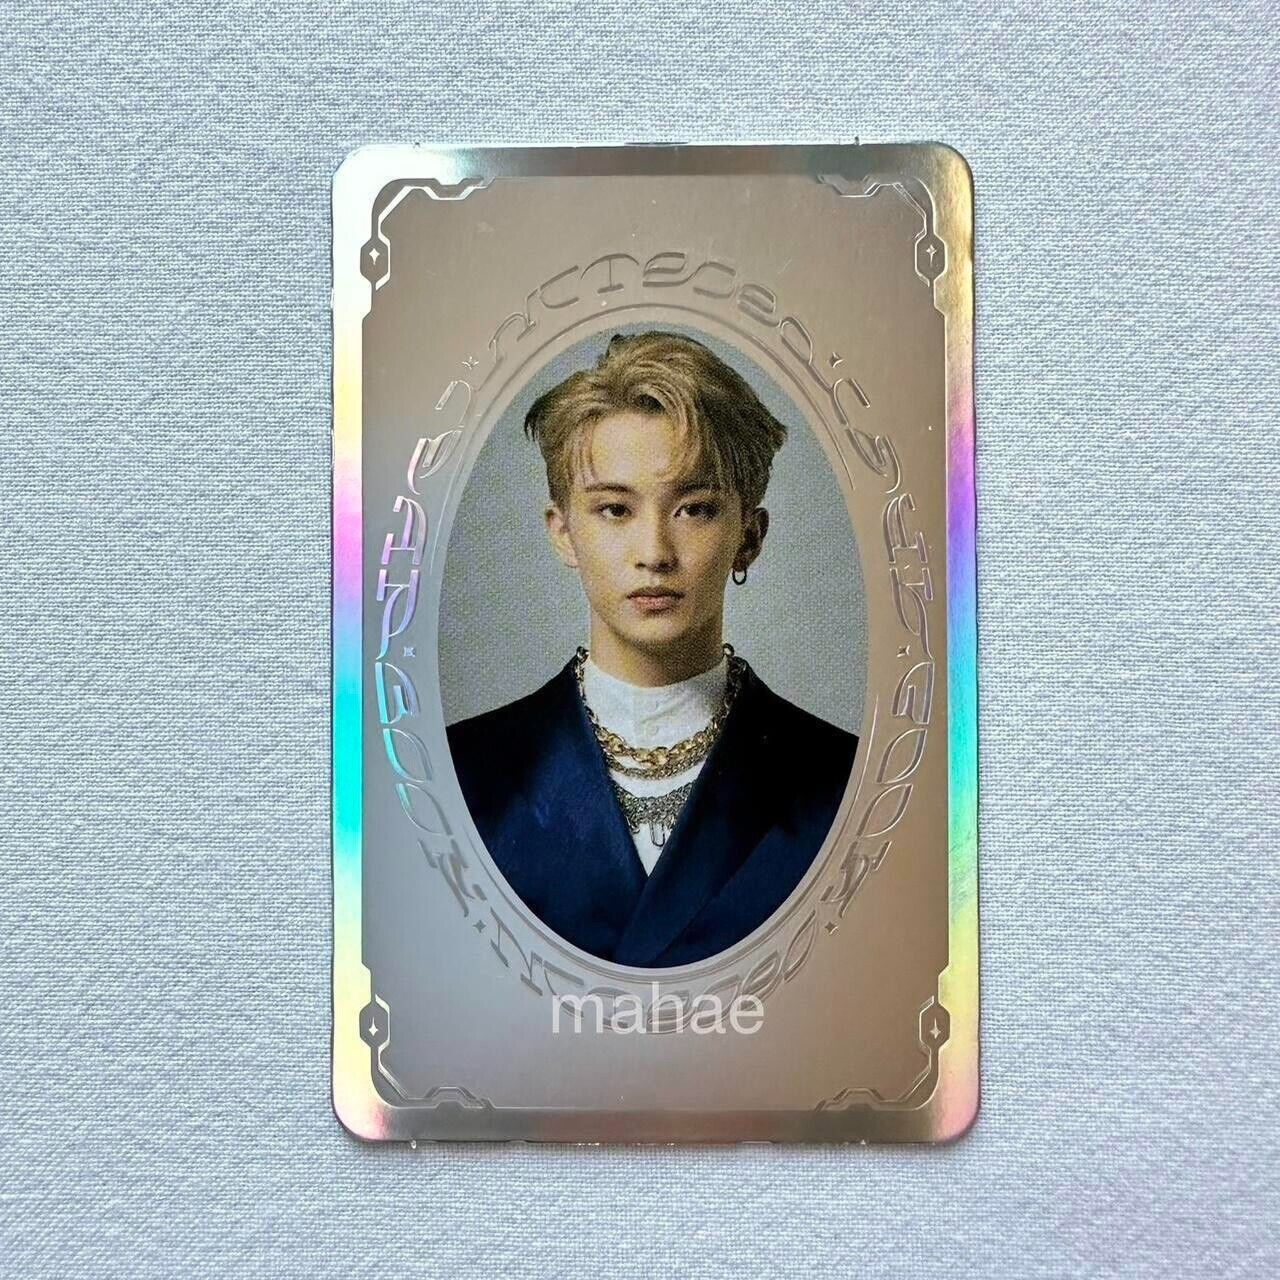 NCT 2020 Mark Special Resonance Yearbook Photocard Photo Card